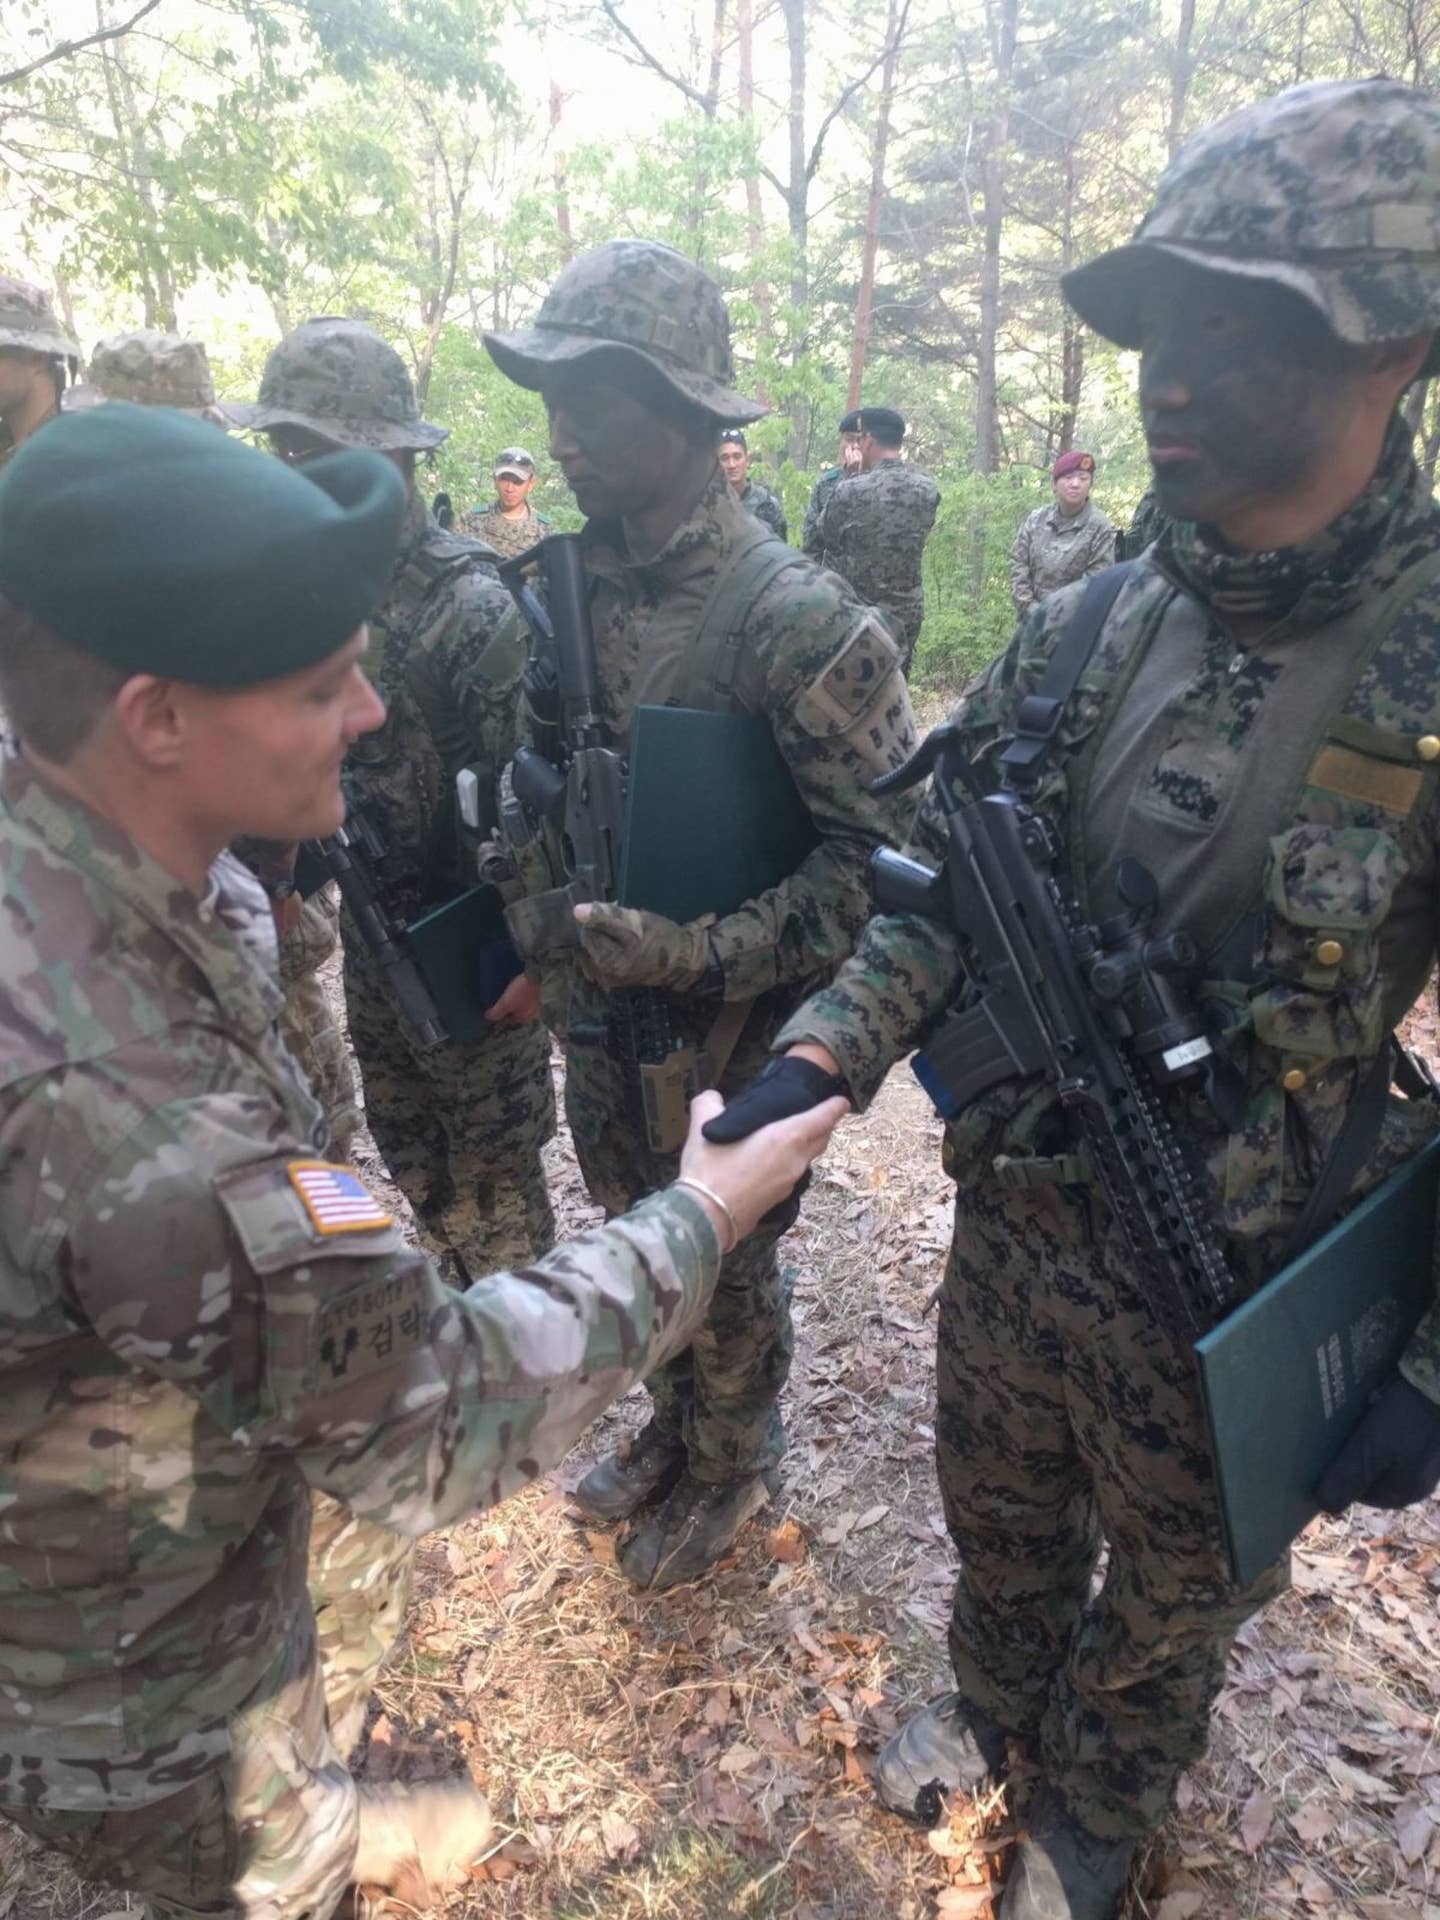 The commander of 2nd Battalion, 1st Special Forces Group, presents his battalion coin and congratulates a soldier from the Republic of Korea Special Forces.